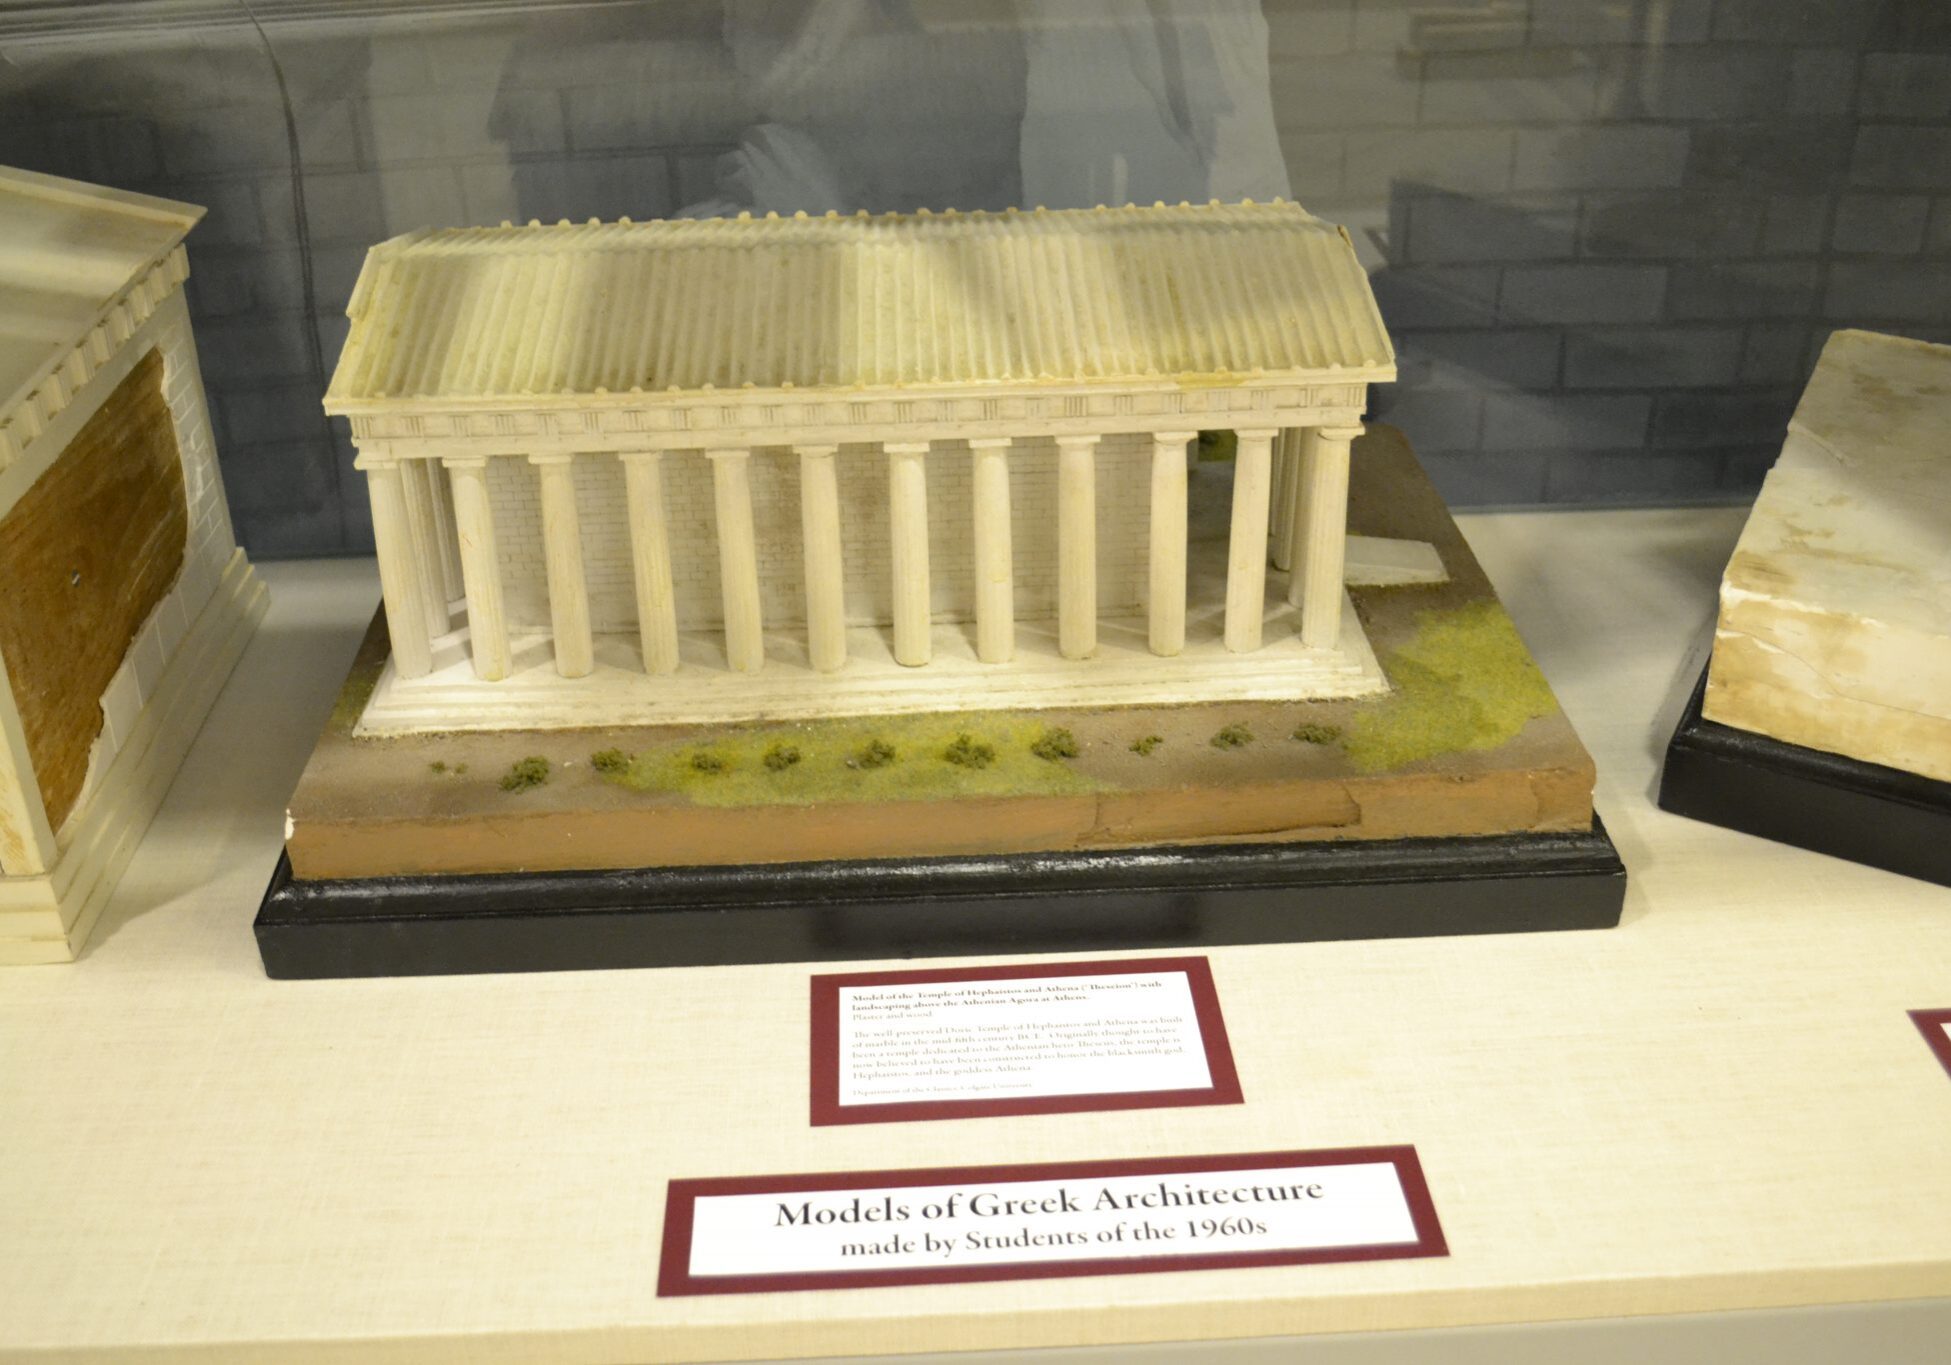 <p>The Hephaisteion.</p><p>Student Project of the 1960s.</p><p>Department of the Classics, Colgate University.</p><p>Photo by Erica Hiddink '17.</p>